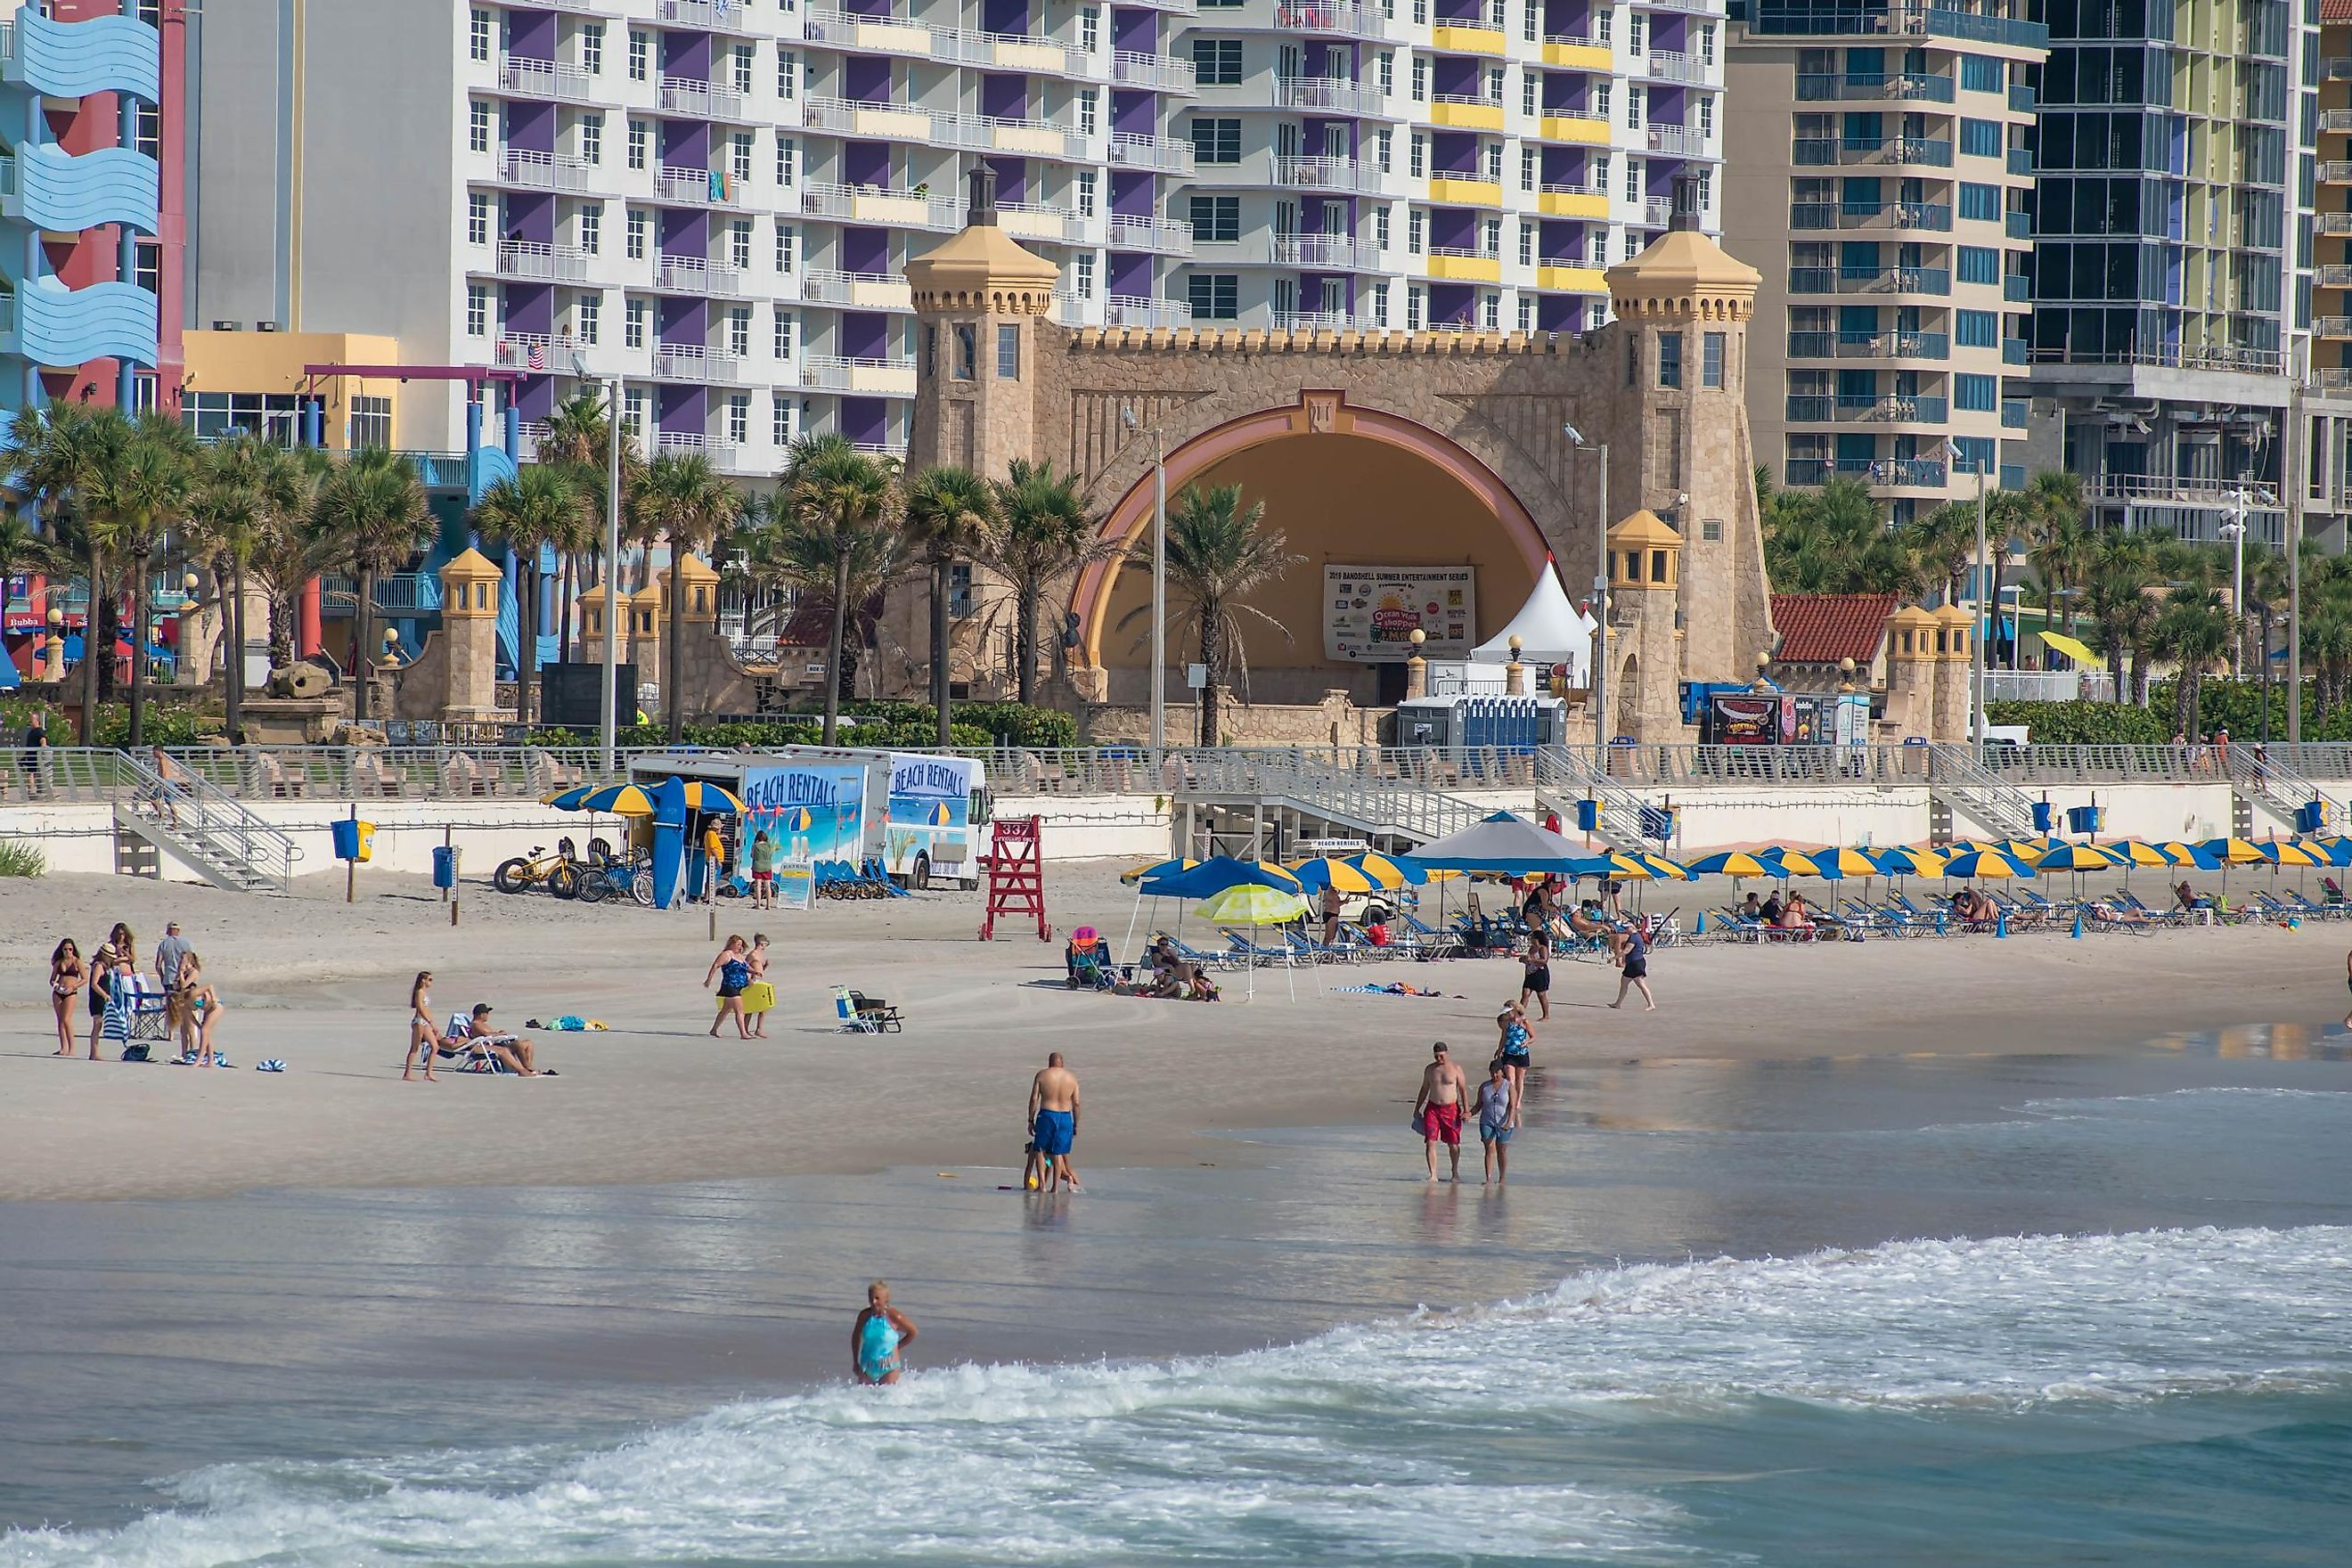 Partial view of The Daytona Beach Bandshell amphitheatre at Boardwalk